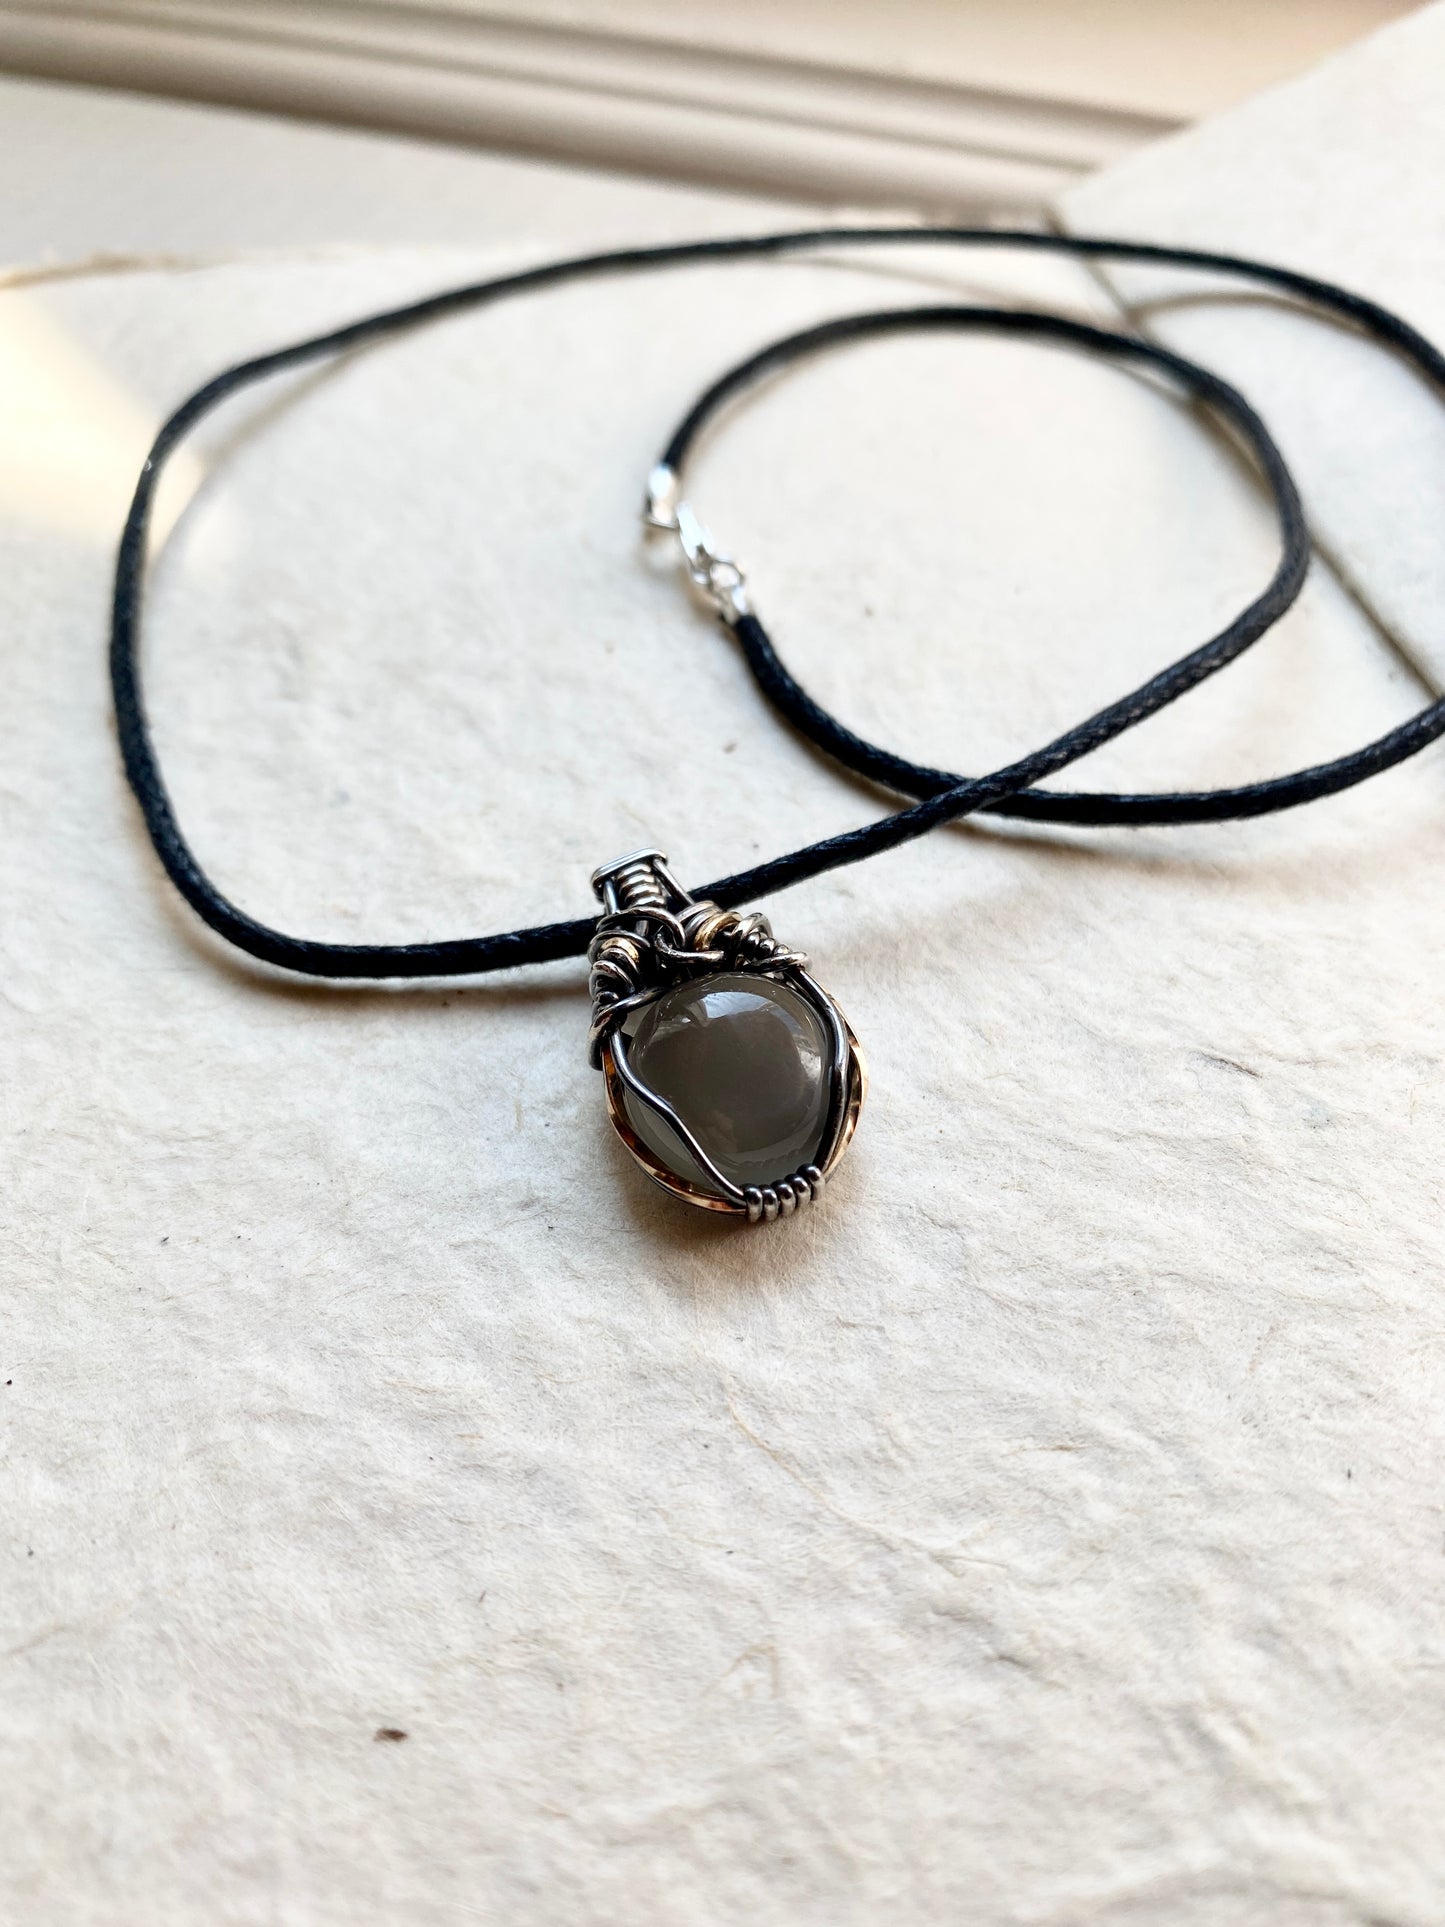 New Moon Wire Wrapped Gray Mini Moonstone Necklace - Original Design in Antiqued Silver and Rose Gold